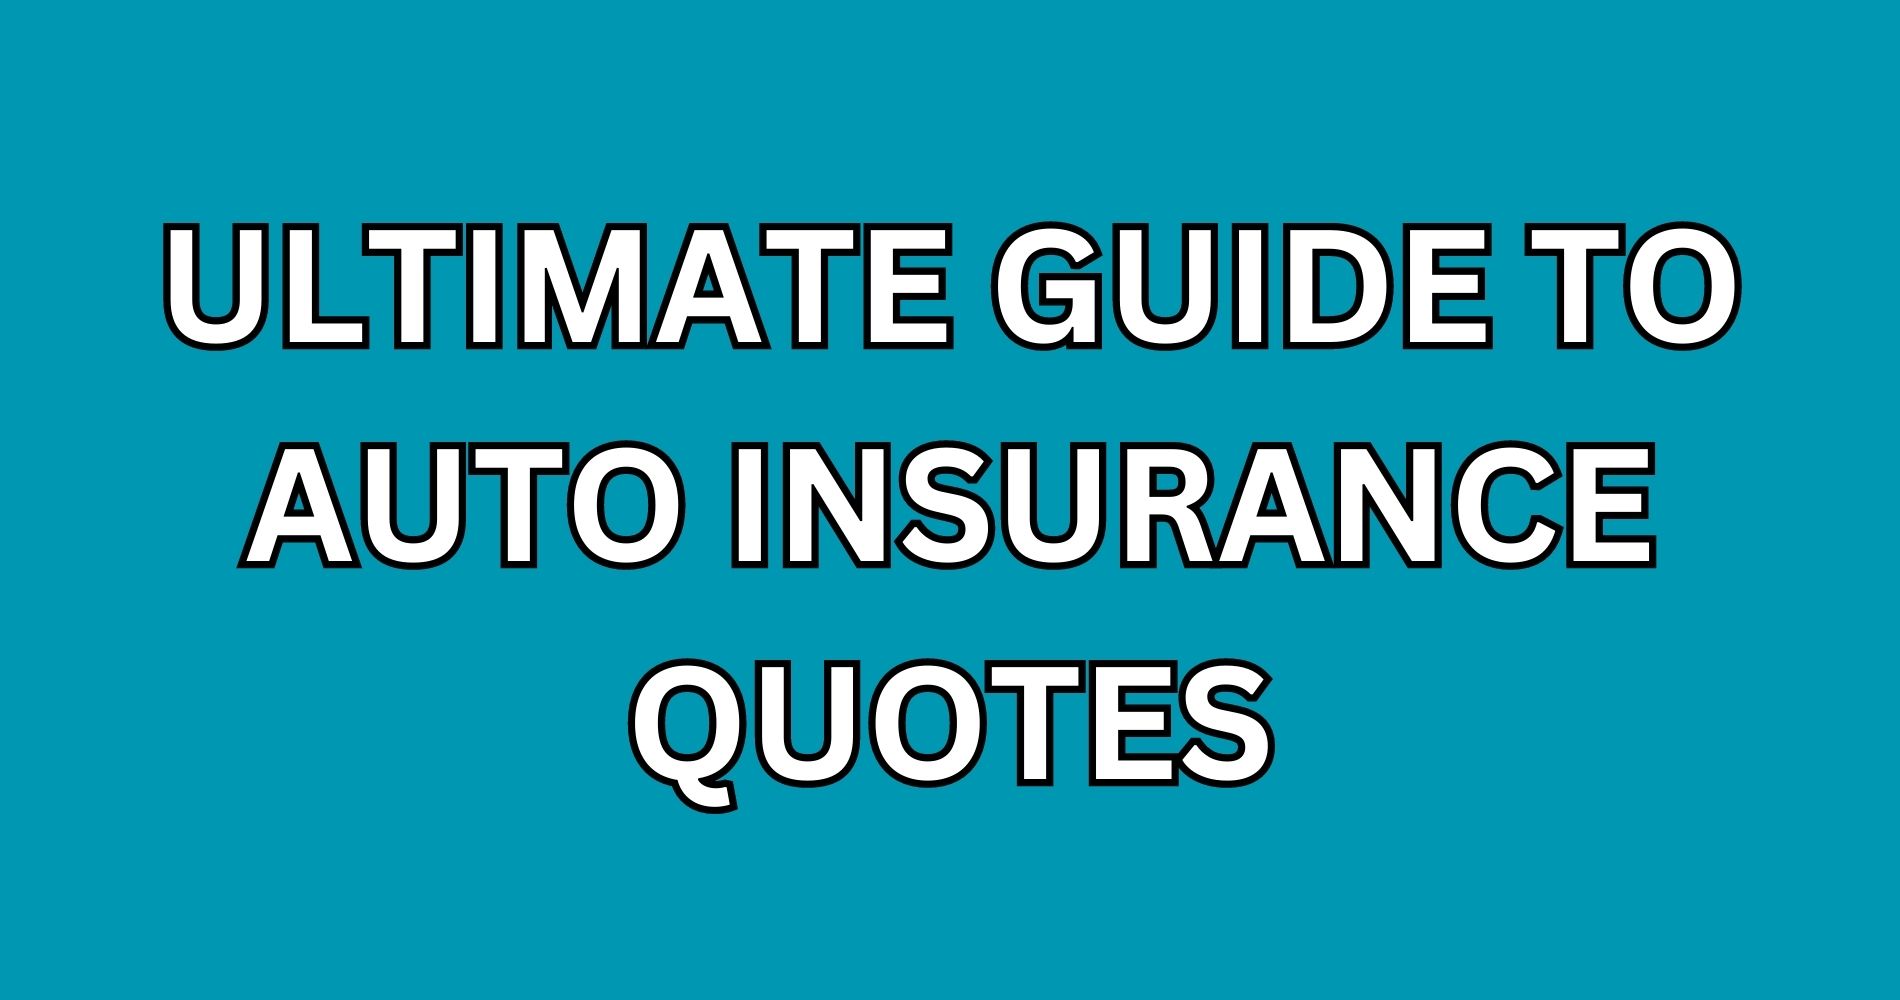 Ultimate Guide to Auto Insurance Quotes